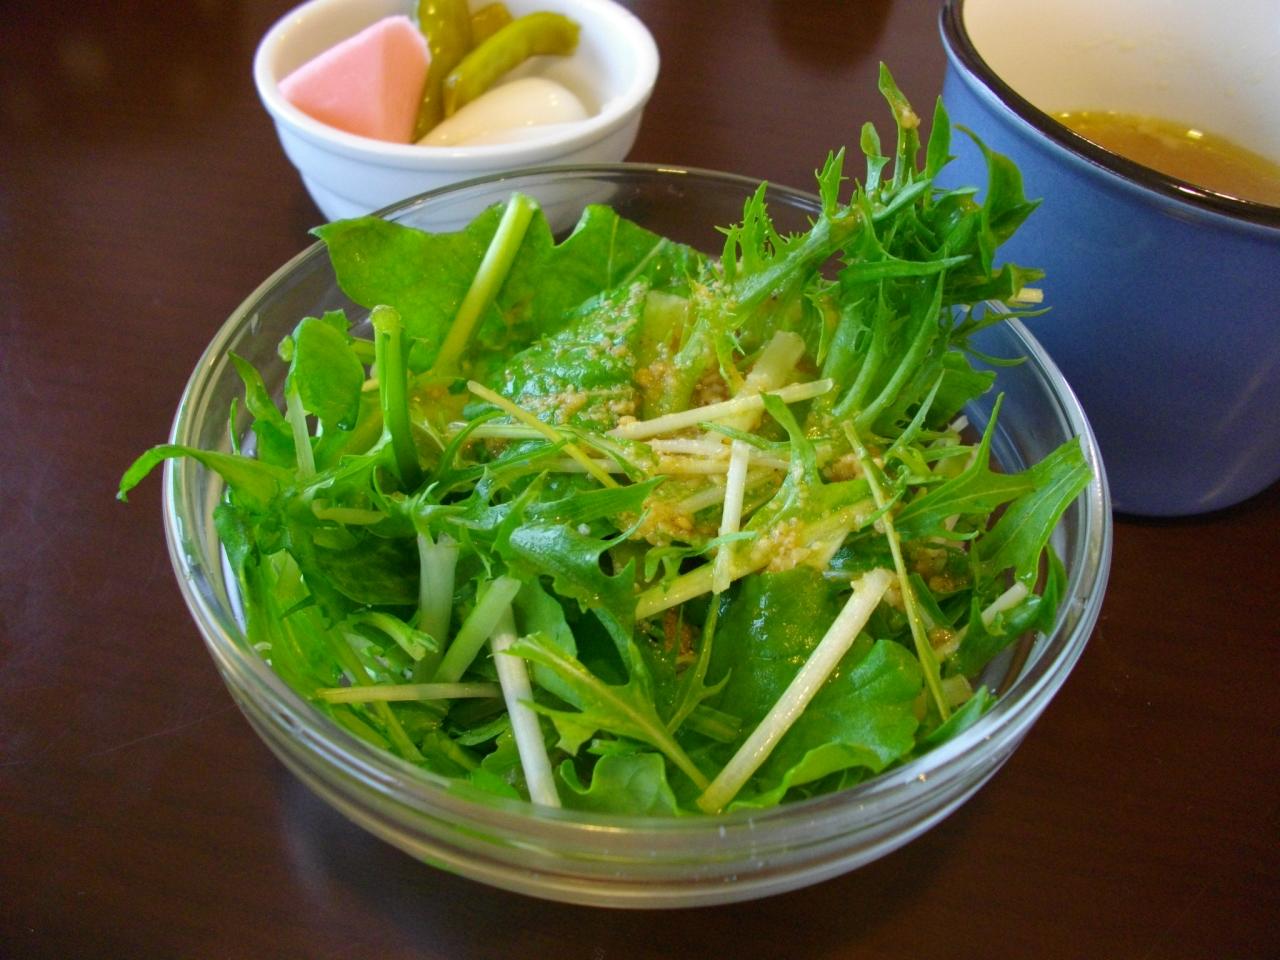 a salad on a wooden table with a small container of pickles